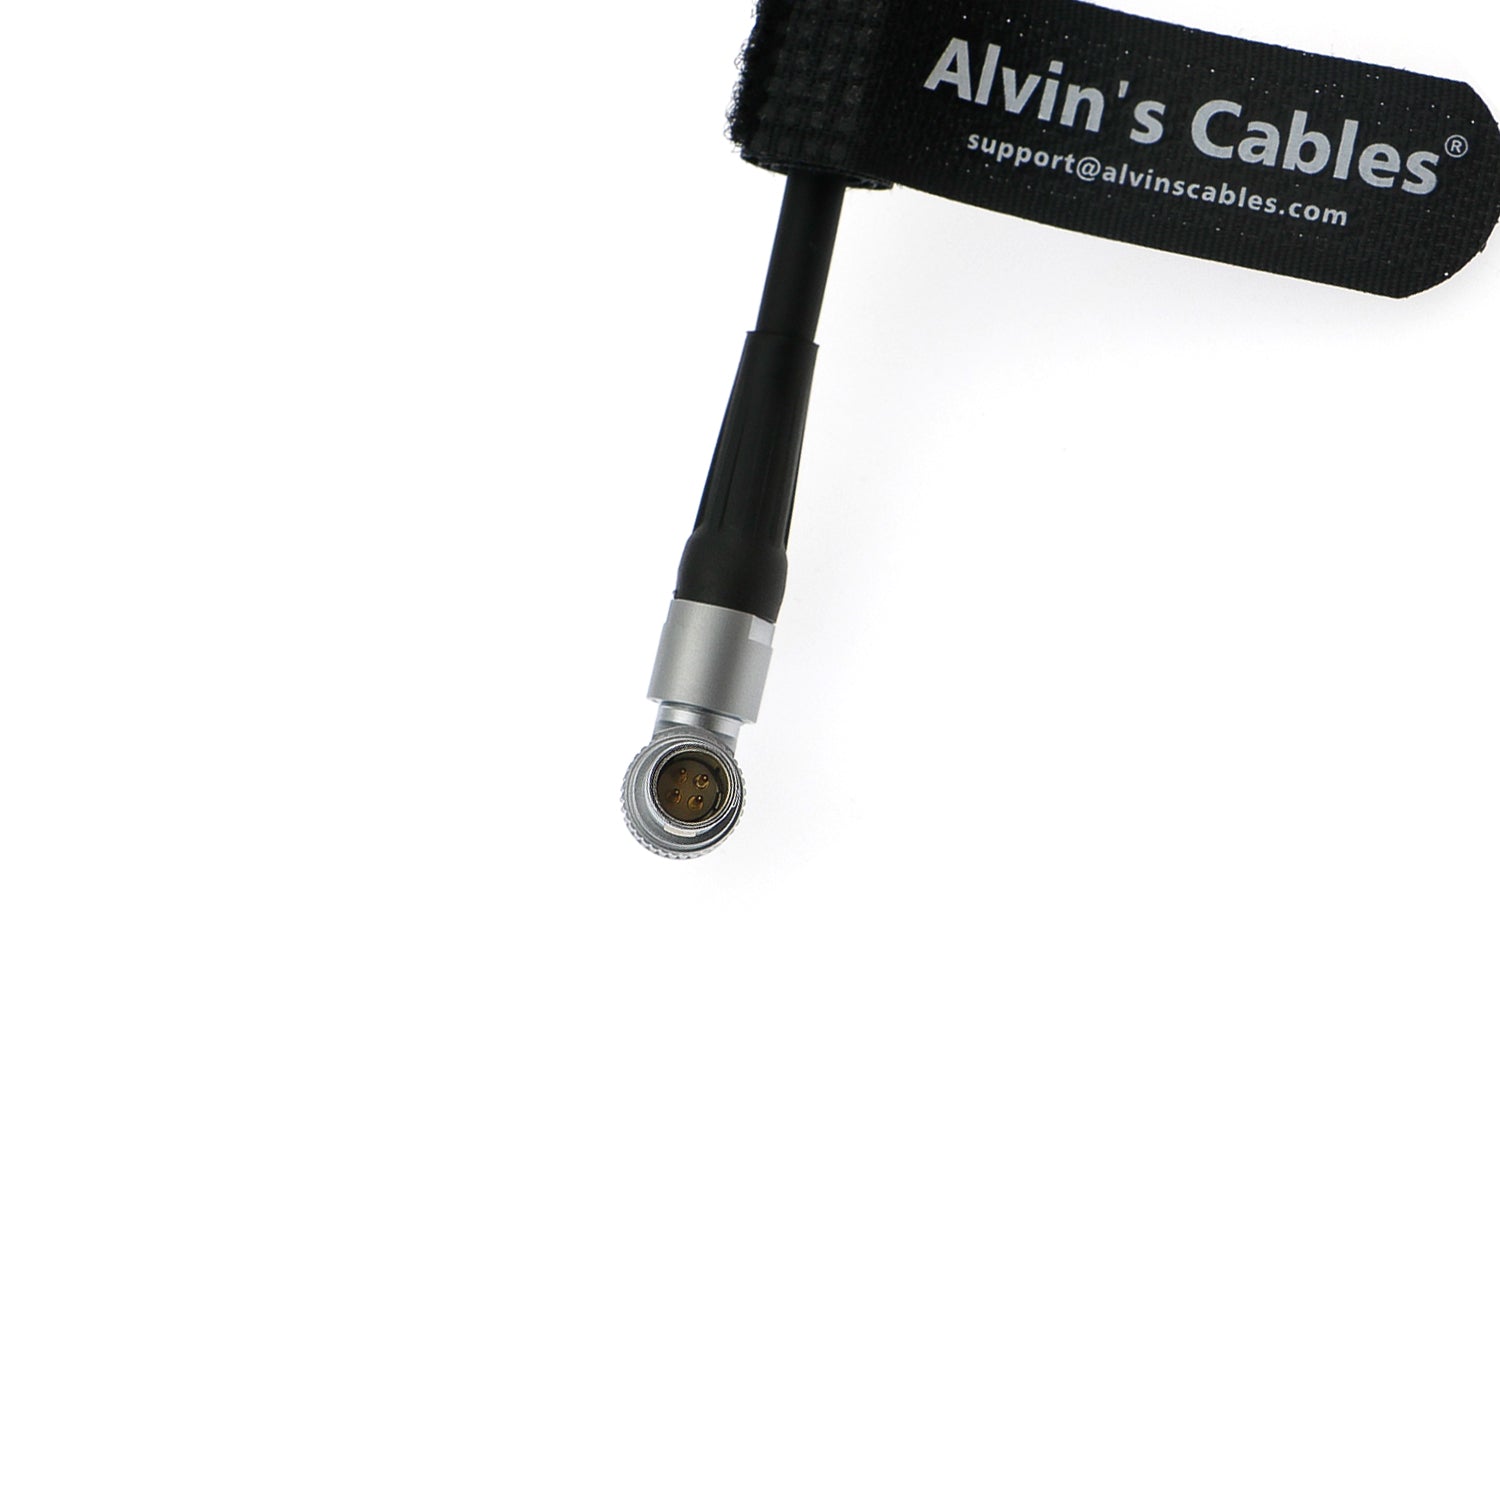 Data Cable for Light Ranger 2 Sensor from Preston MDR3 MDR4 Rotatable Right Angle 4 Pin Male to 4 Pin Alvin's Cables